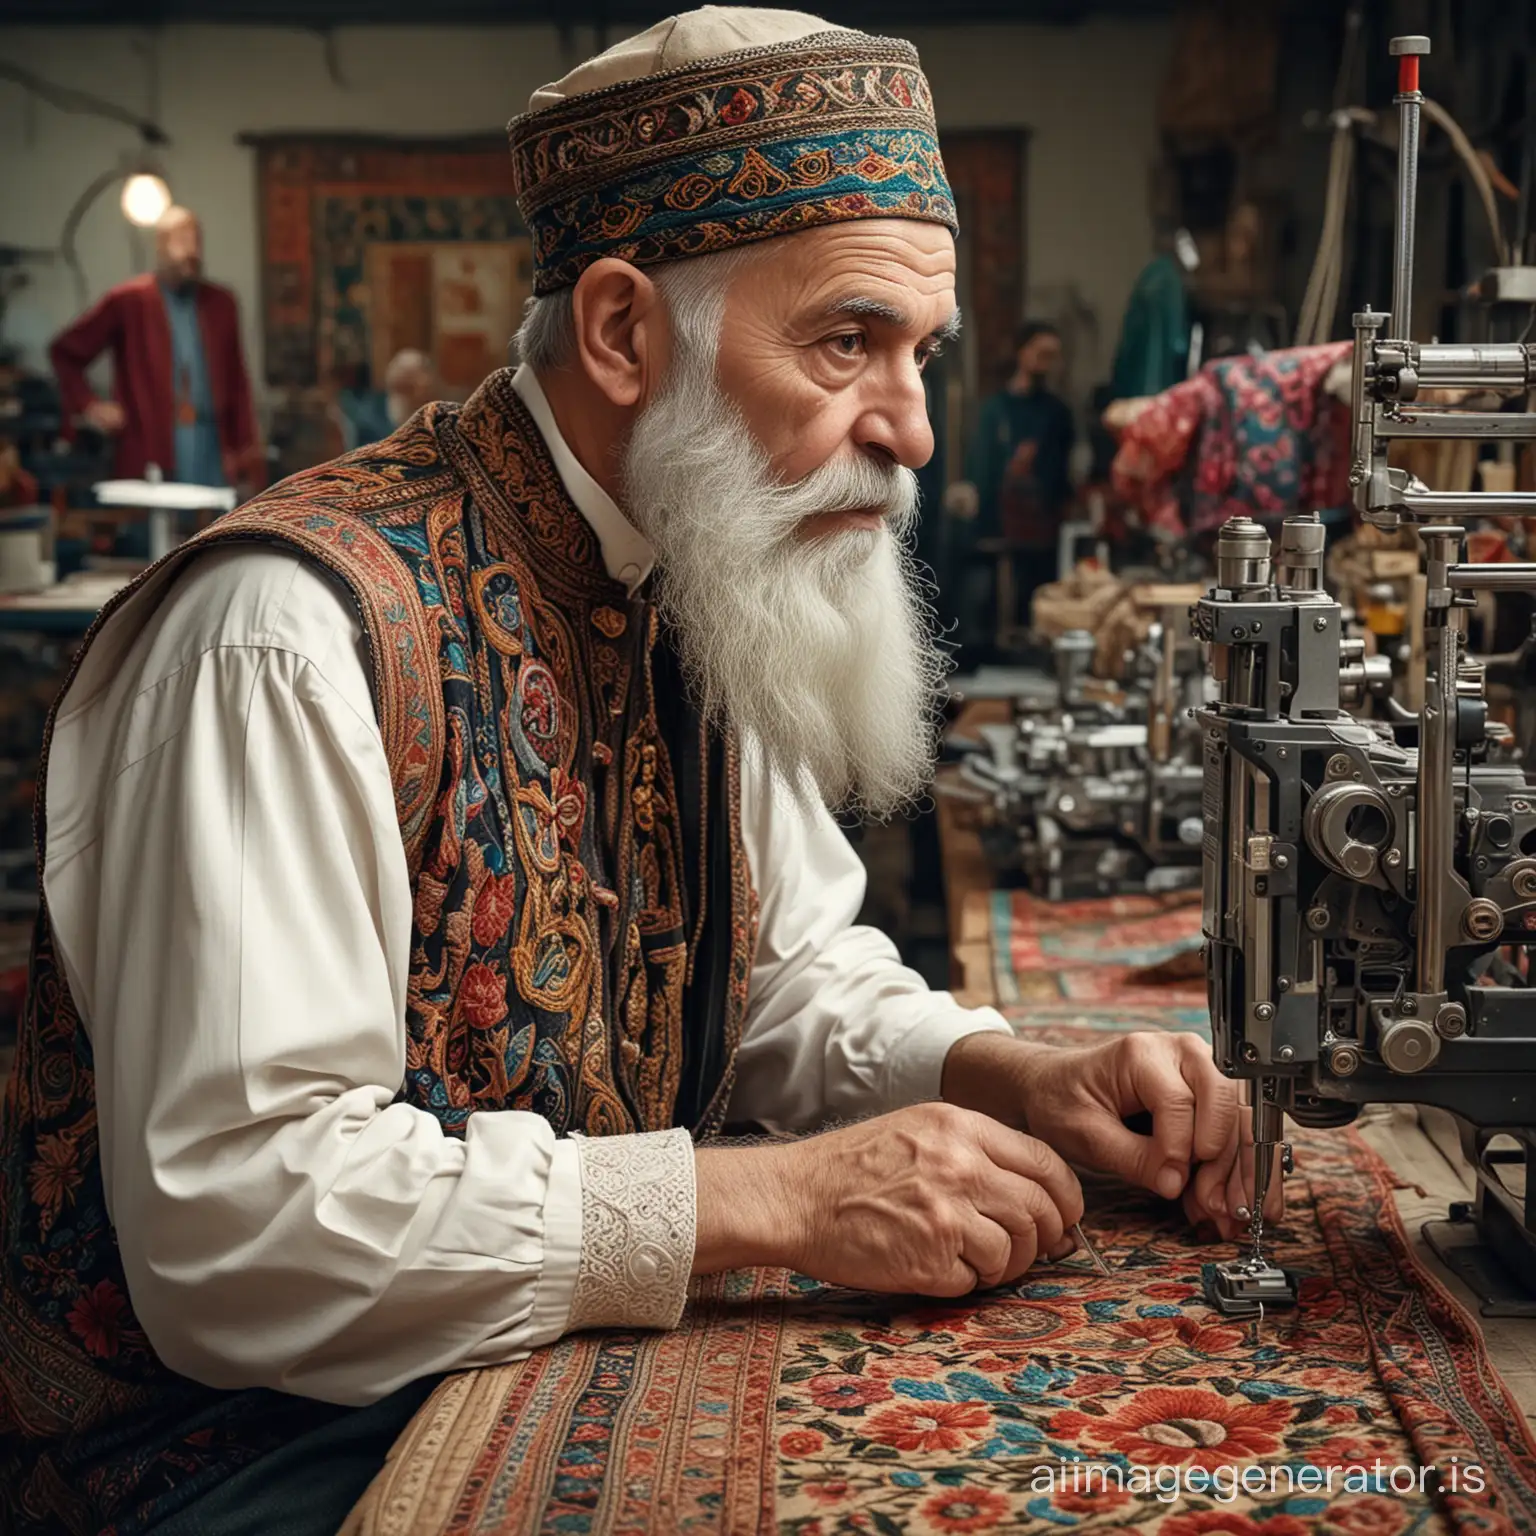 HyperRealistic-Old-Bearded-Man-in-Persian-FolkArt-Attire-Operating-Vintage-Industrial-Embroidery-Machine-in-German-Factory